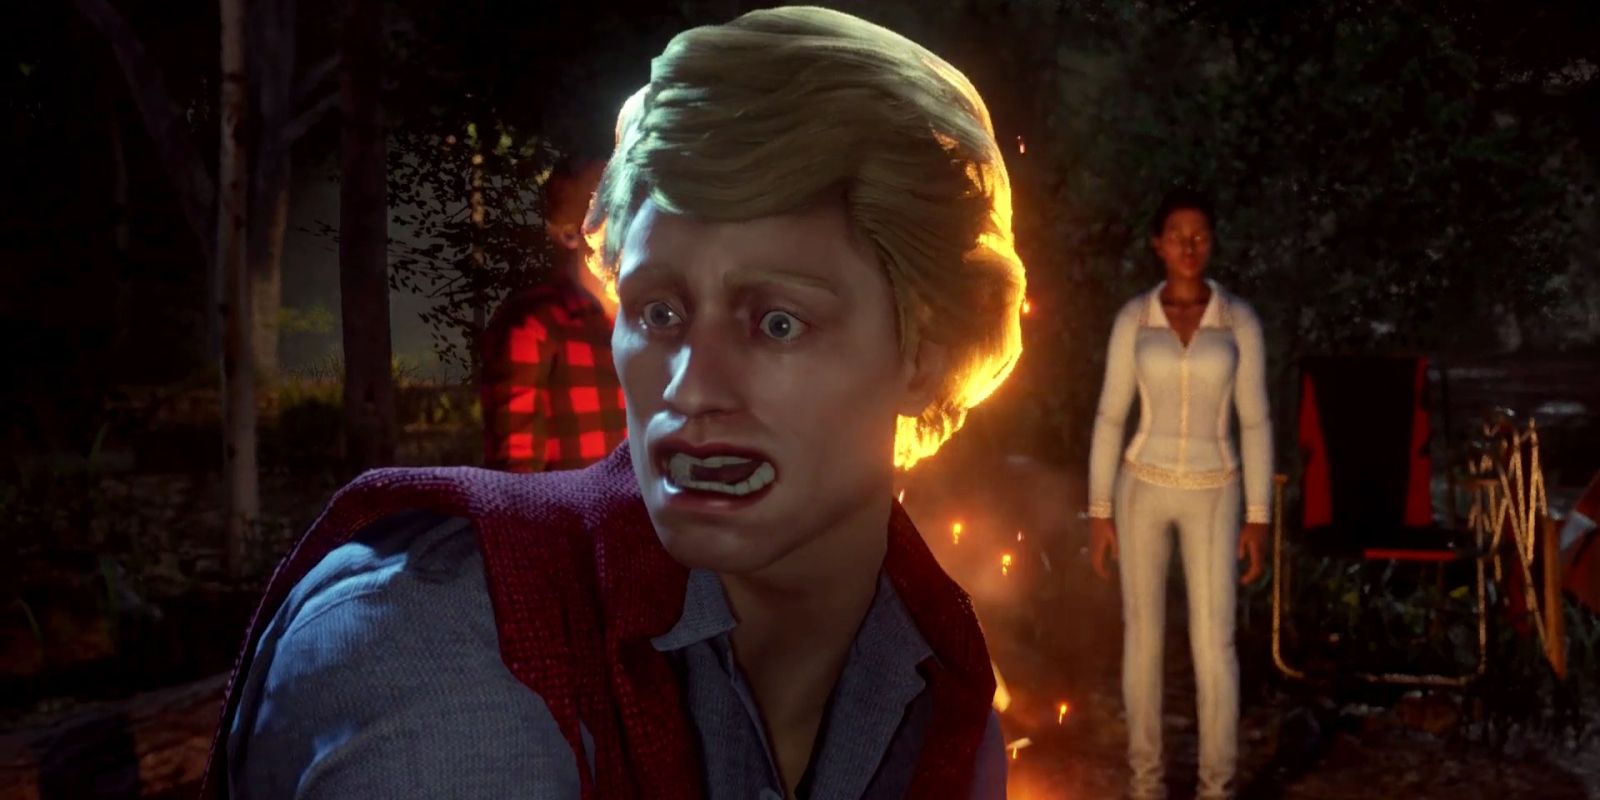 Chad's mouth is agape as he stands near an outside fire in Friday the 13th: The Game.